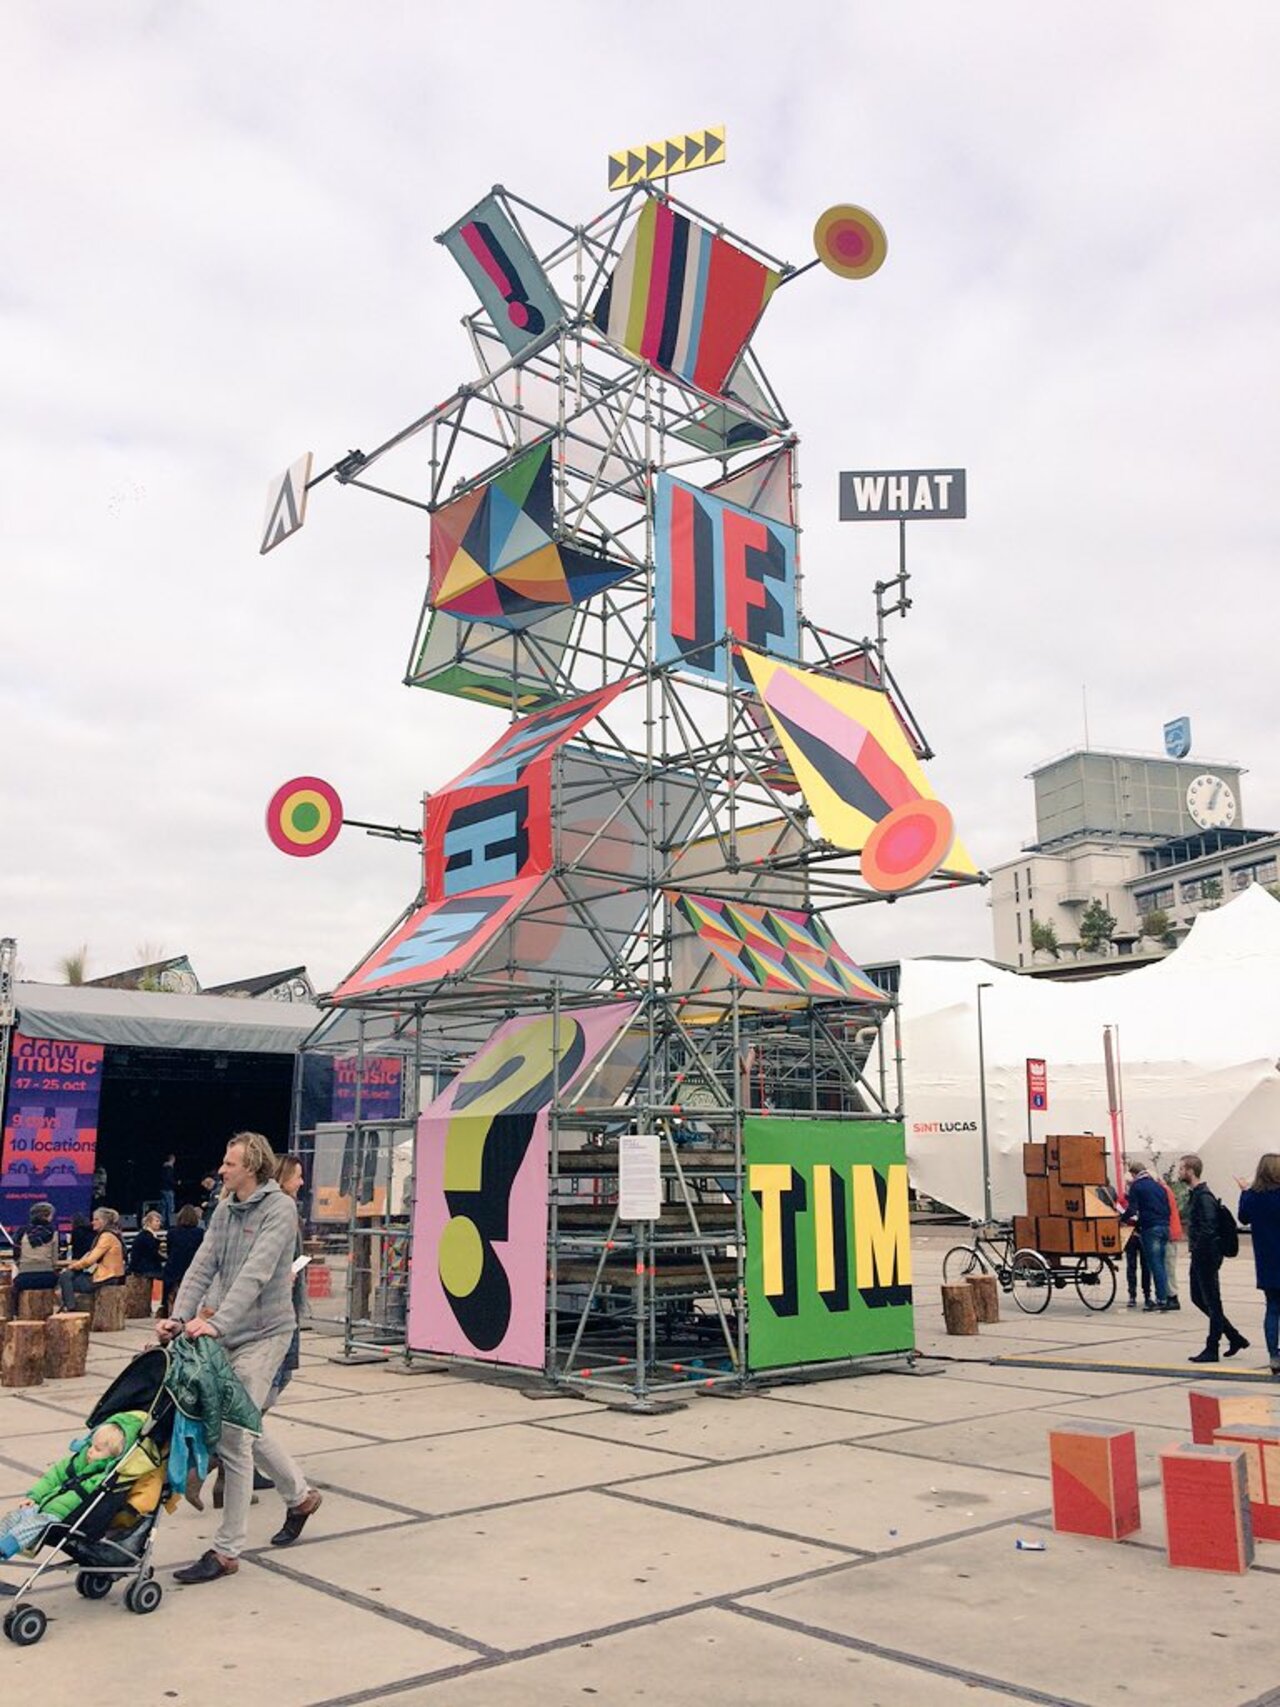 RT @_designjunction: Day two at #DDW15 #architecture #graffiti #installations https://t.co/WB86VXCNvS